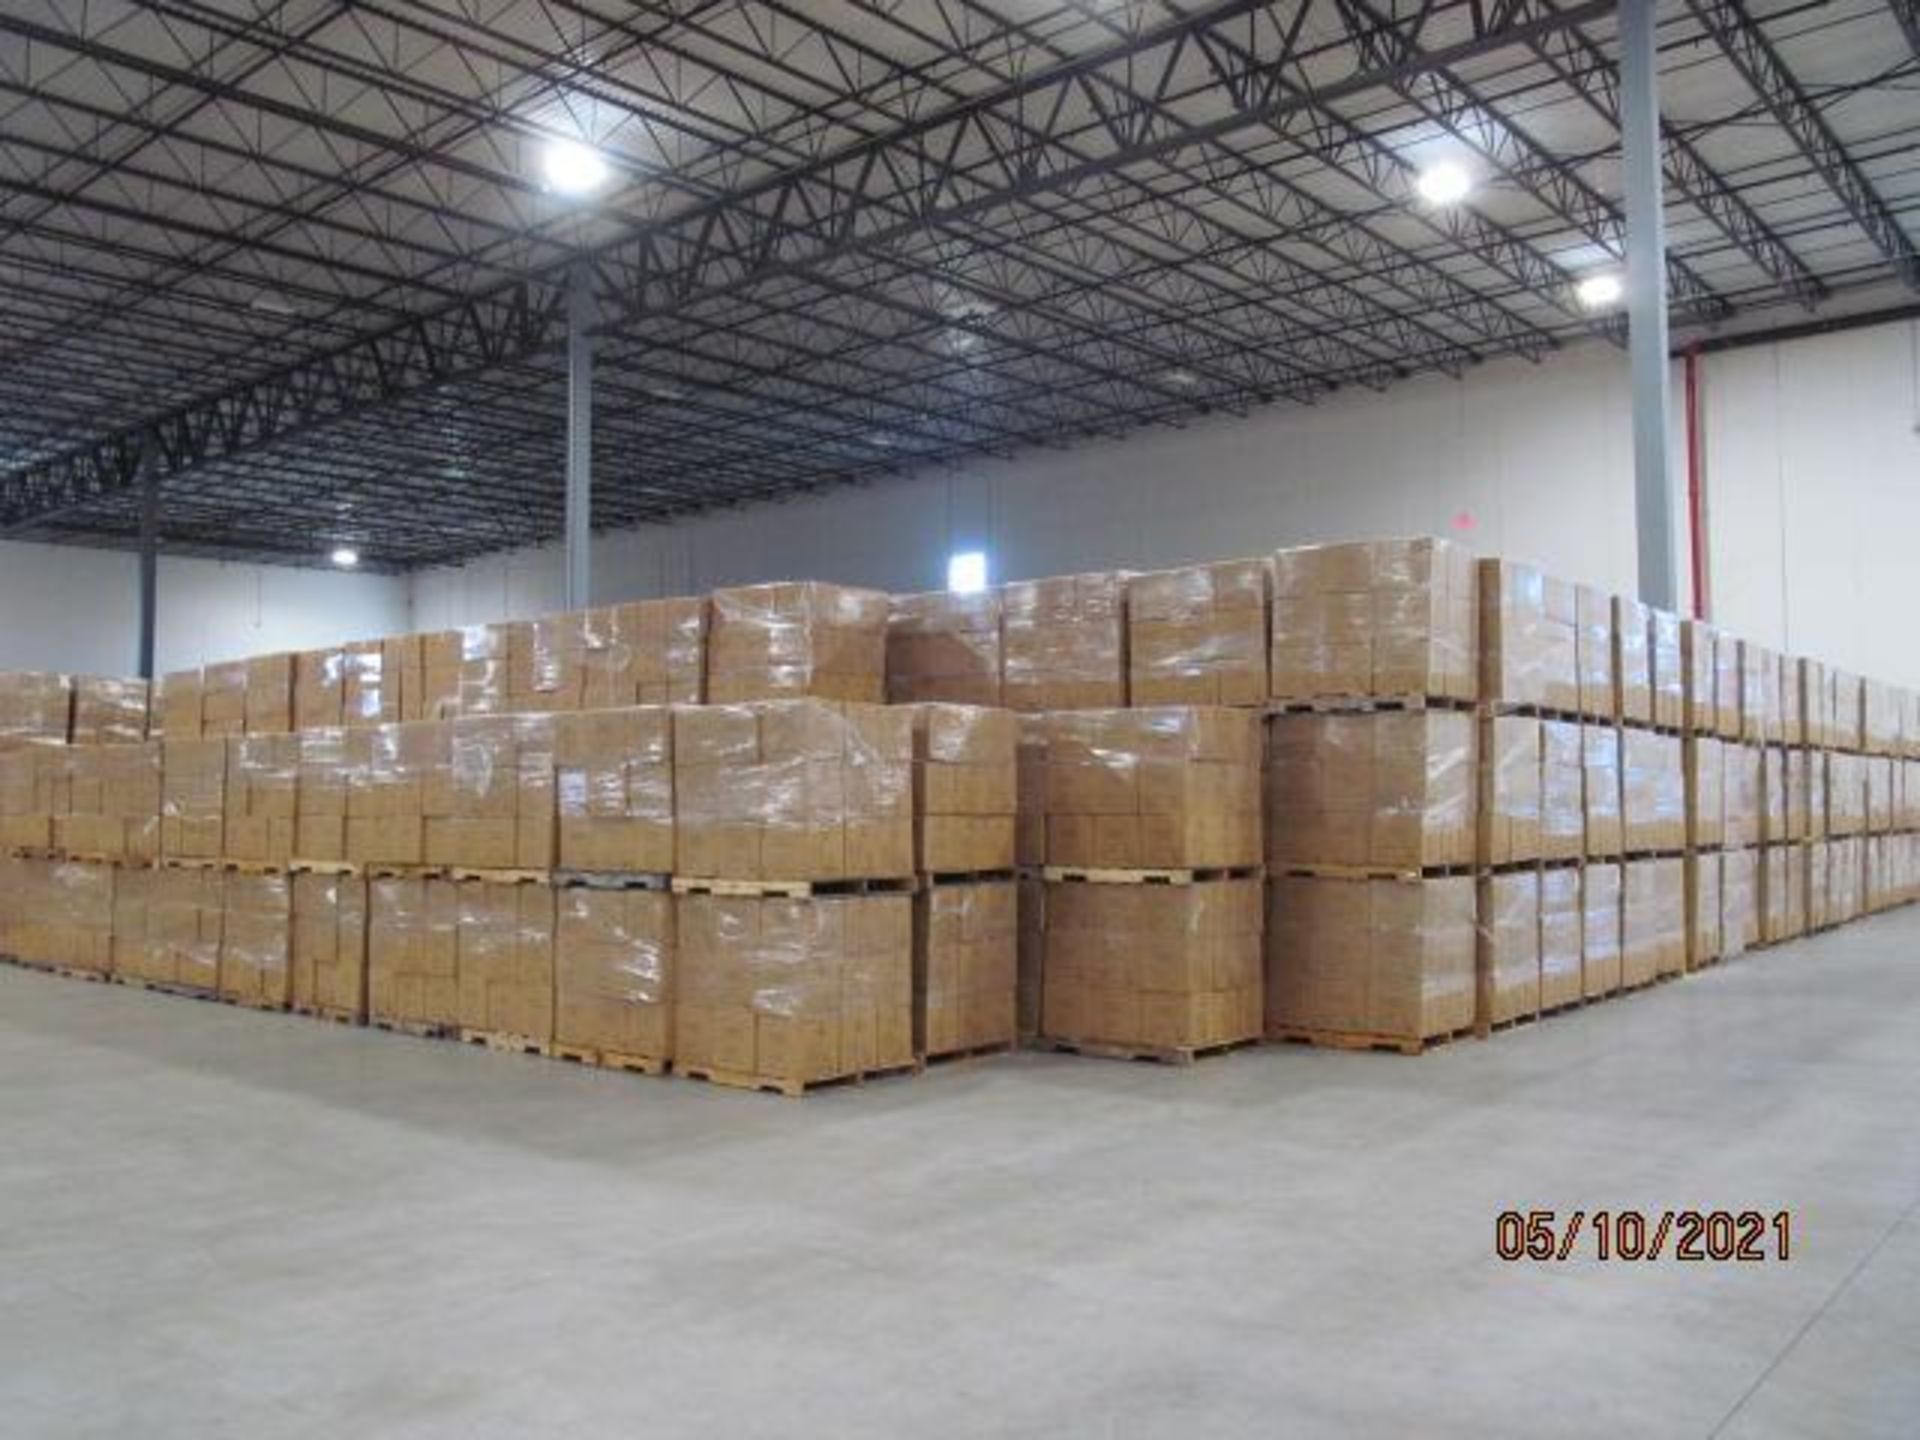 Lot of Waxman Kleen Freak Sanitizing Wipes consisting of 202,176 packages on 312 pallets. Each packa - Image 11 of 11